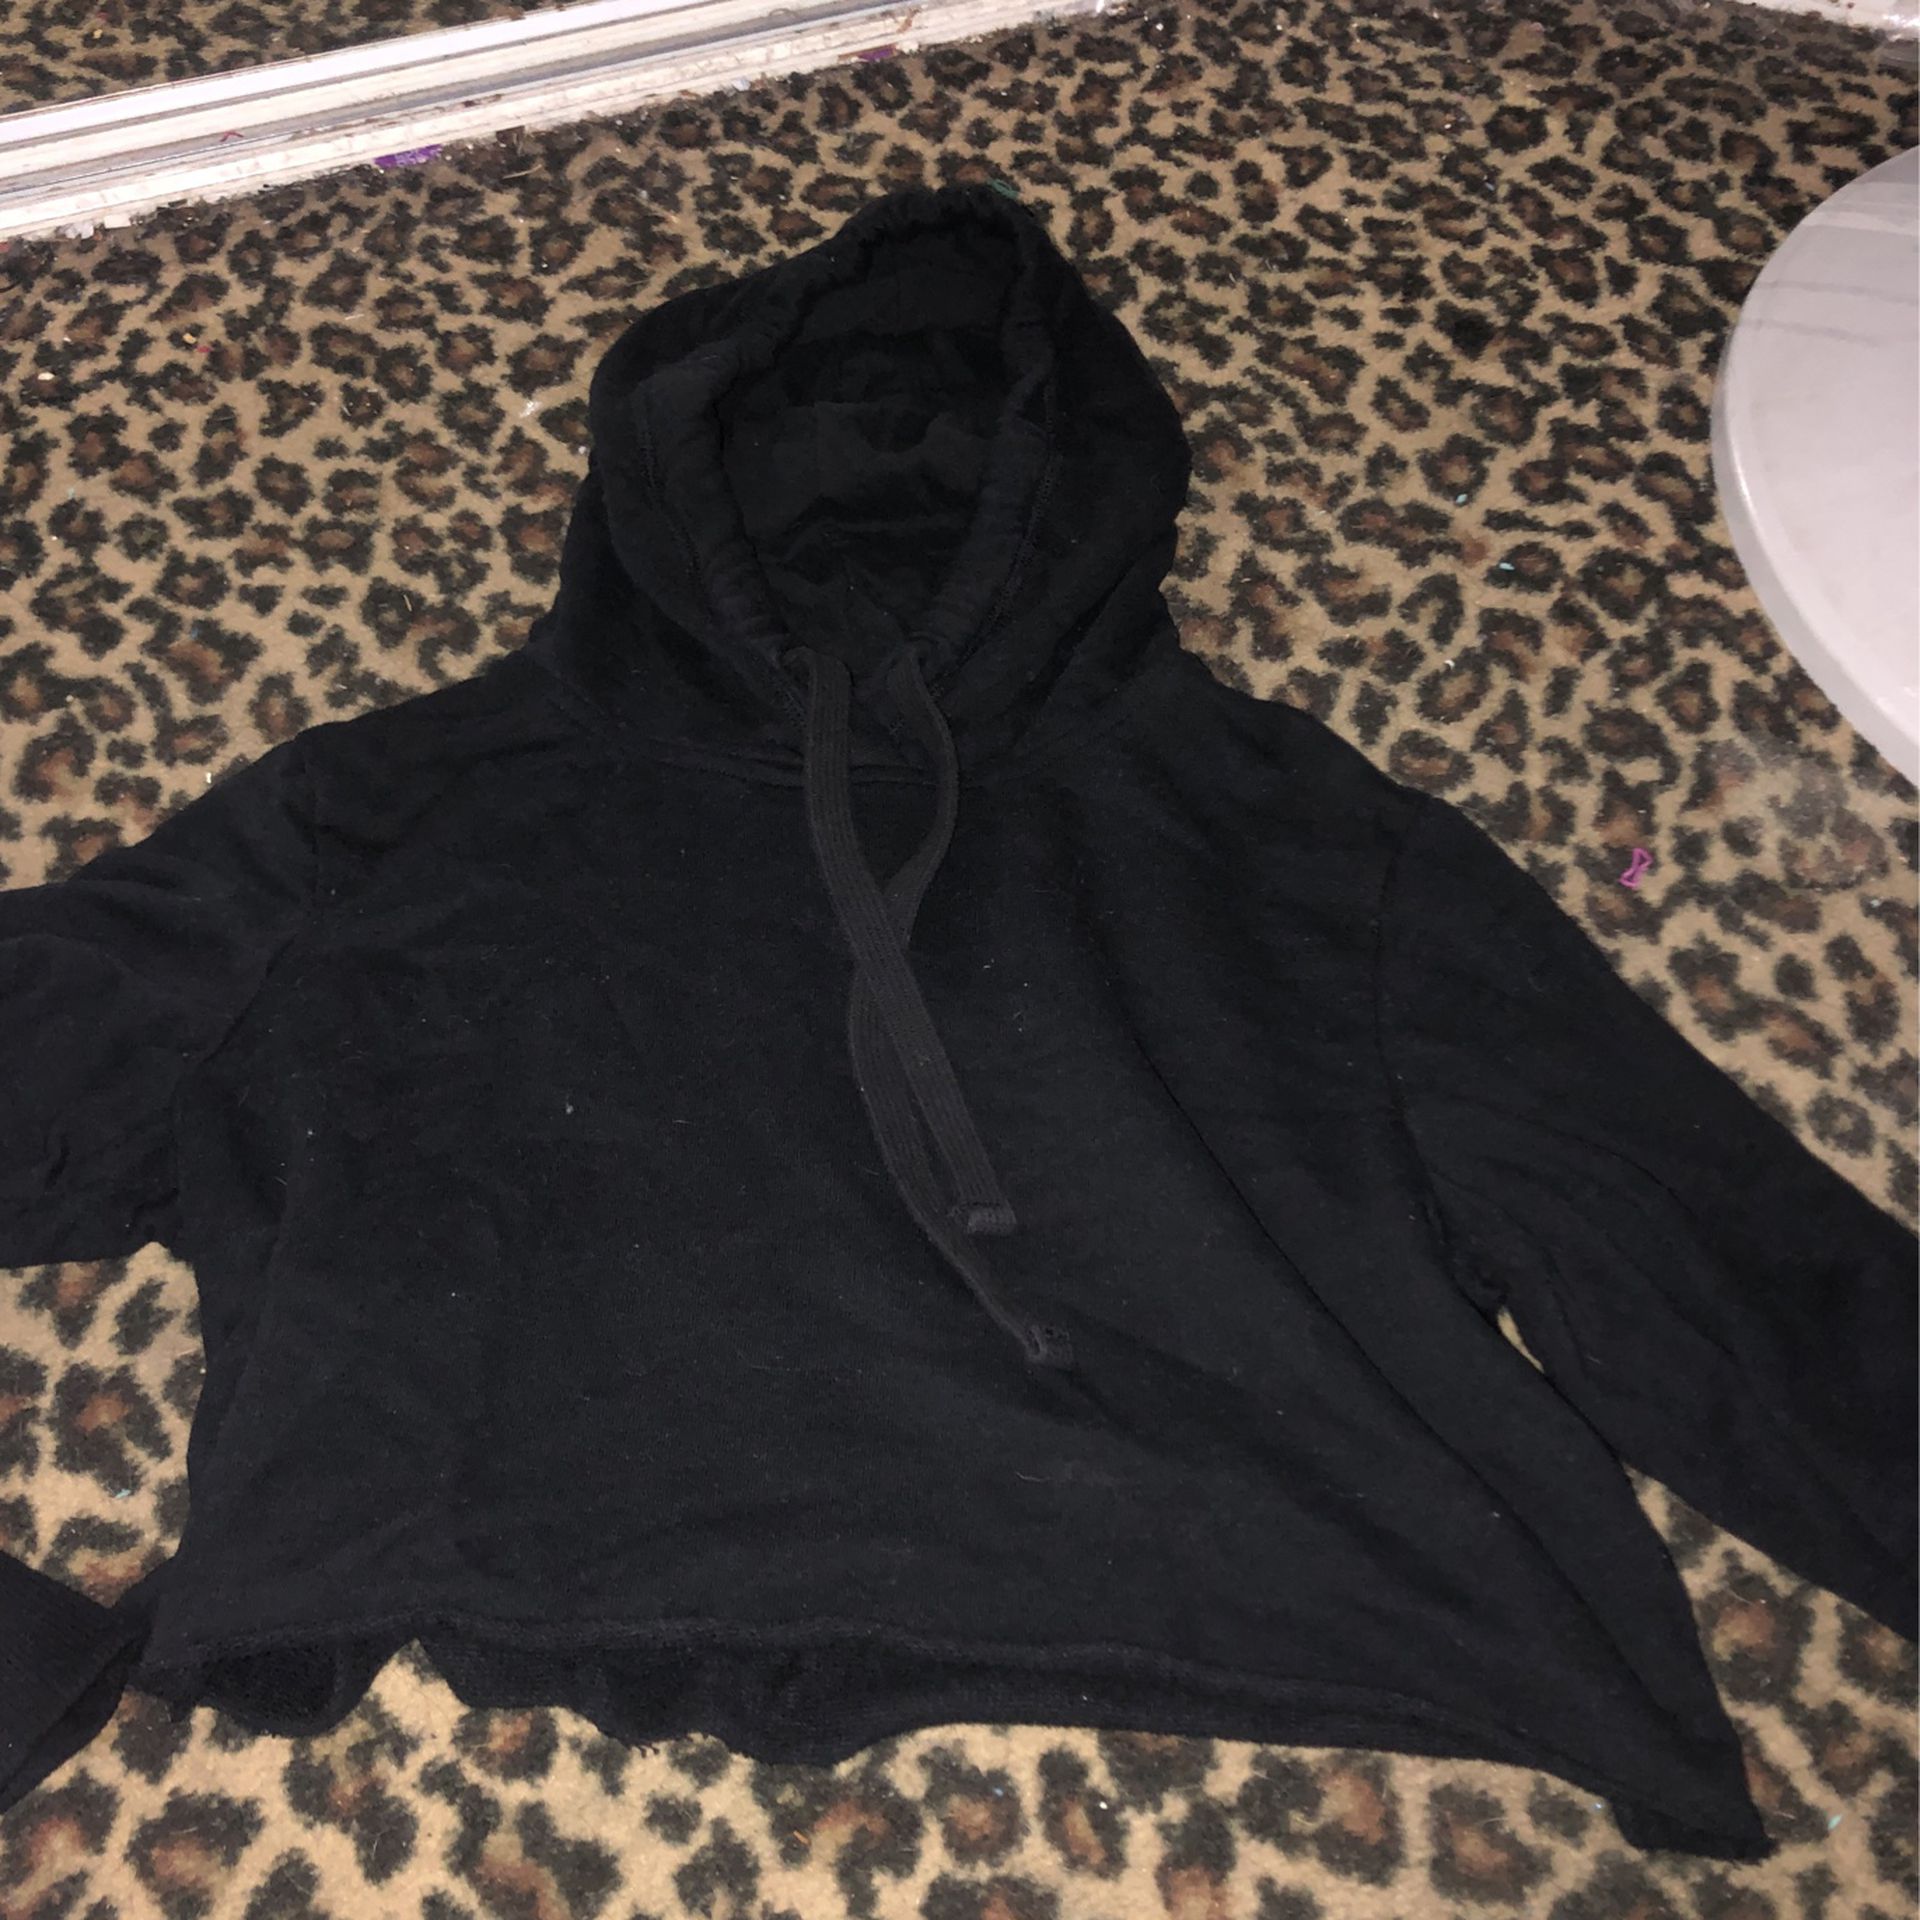 Hollister Cropped Black Hoodie (size Large)